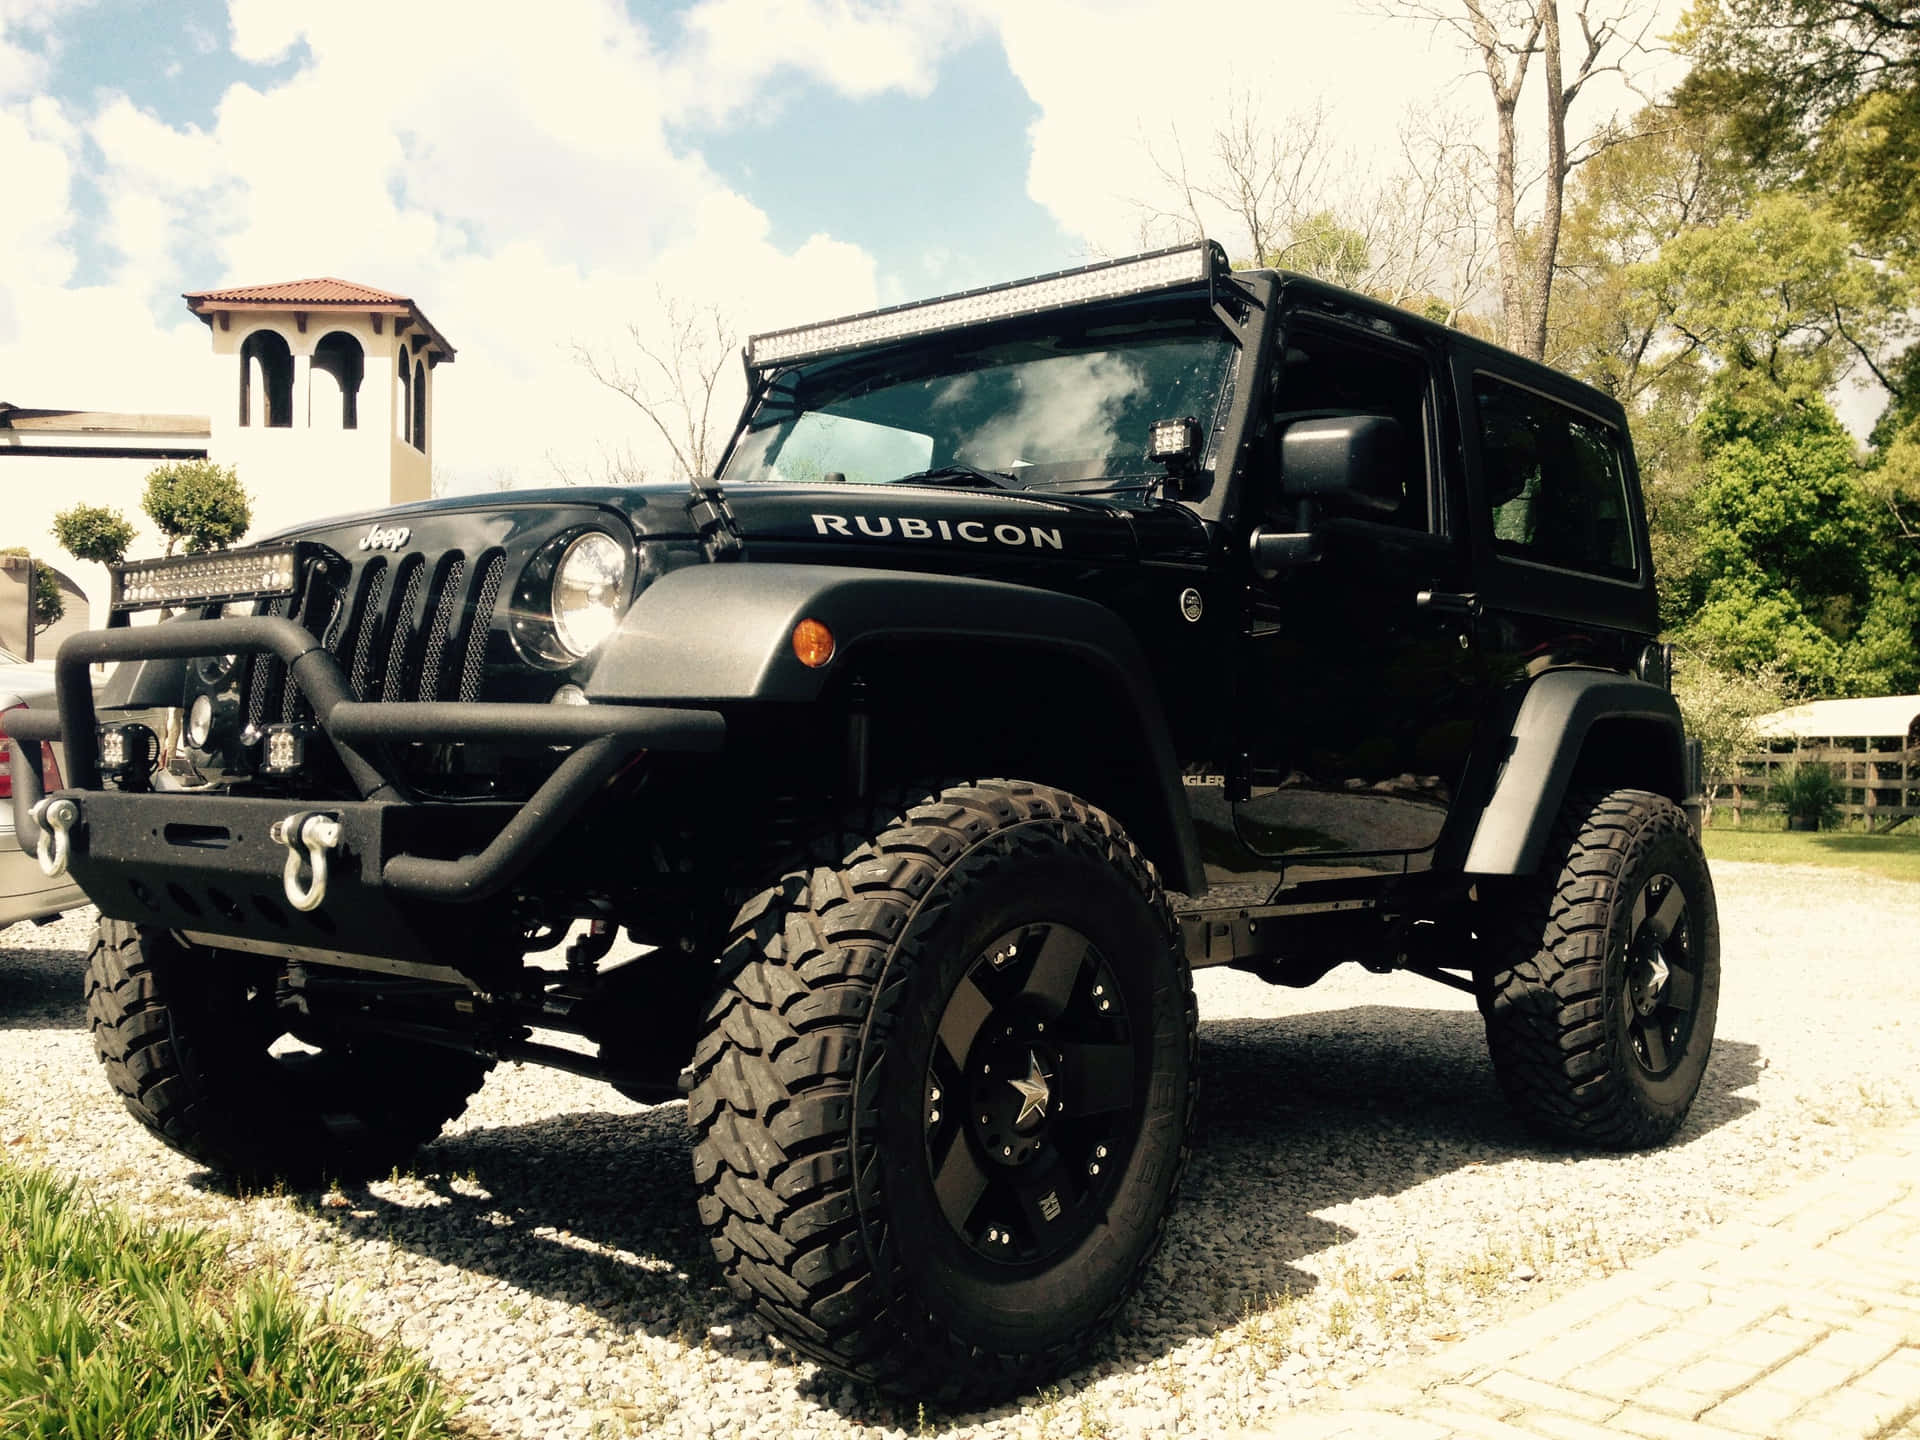 A Black Jeep Parked In A Driveway